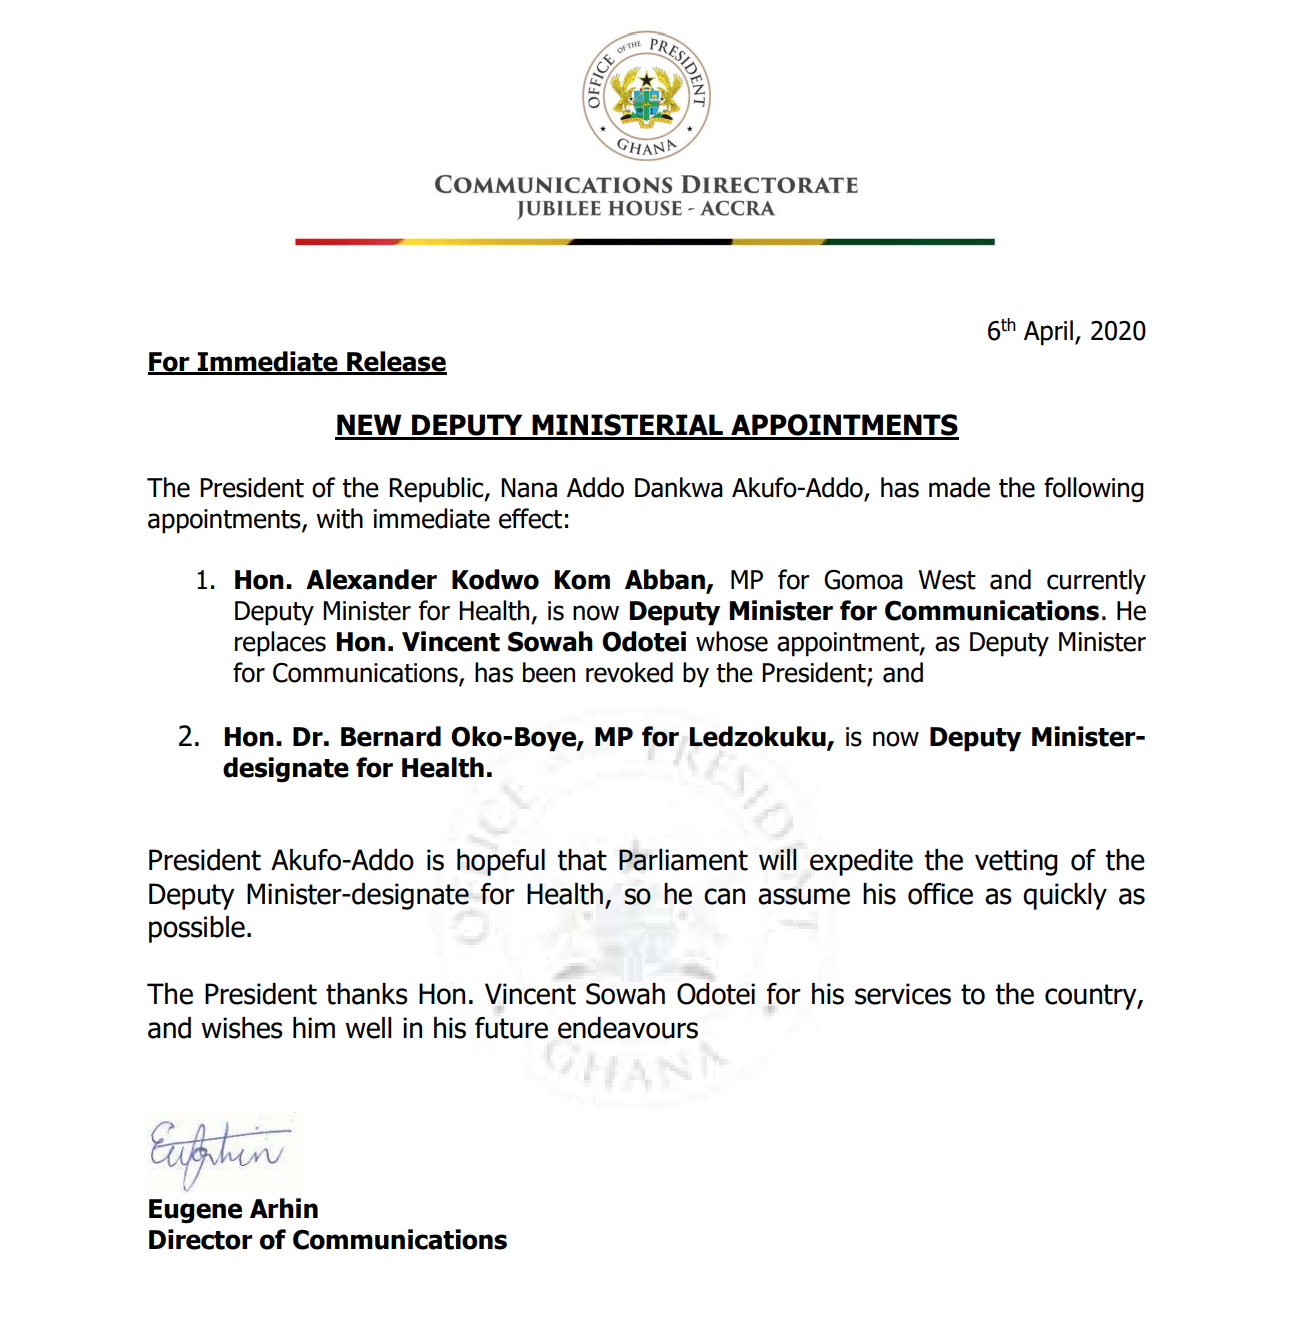 Vincent Sowah Odotei’s appointment as Deputy Communications Minister revoked